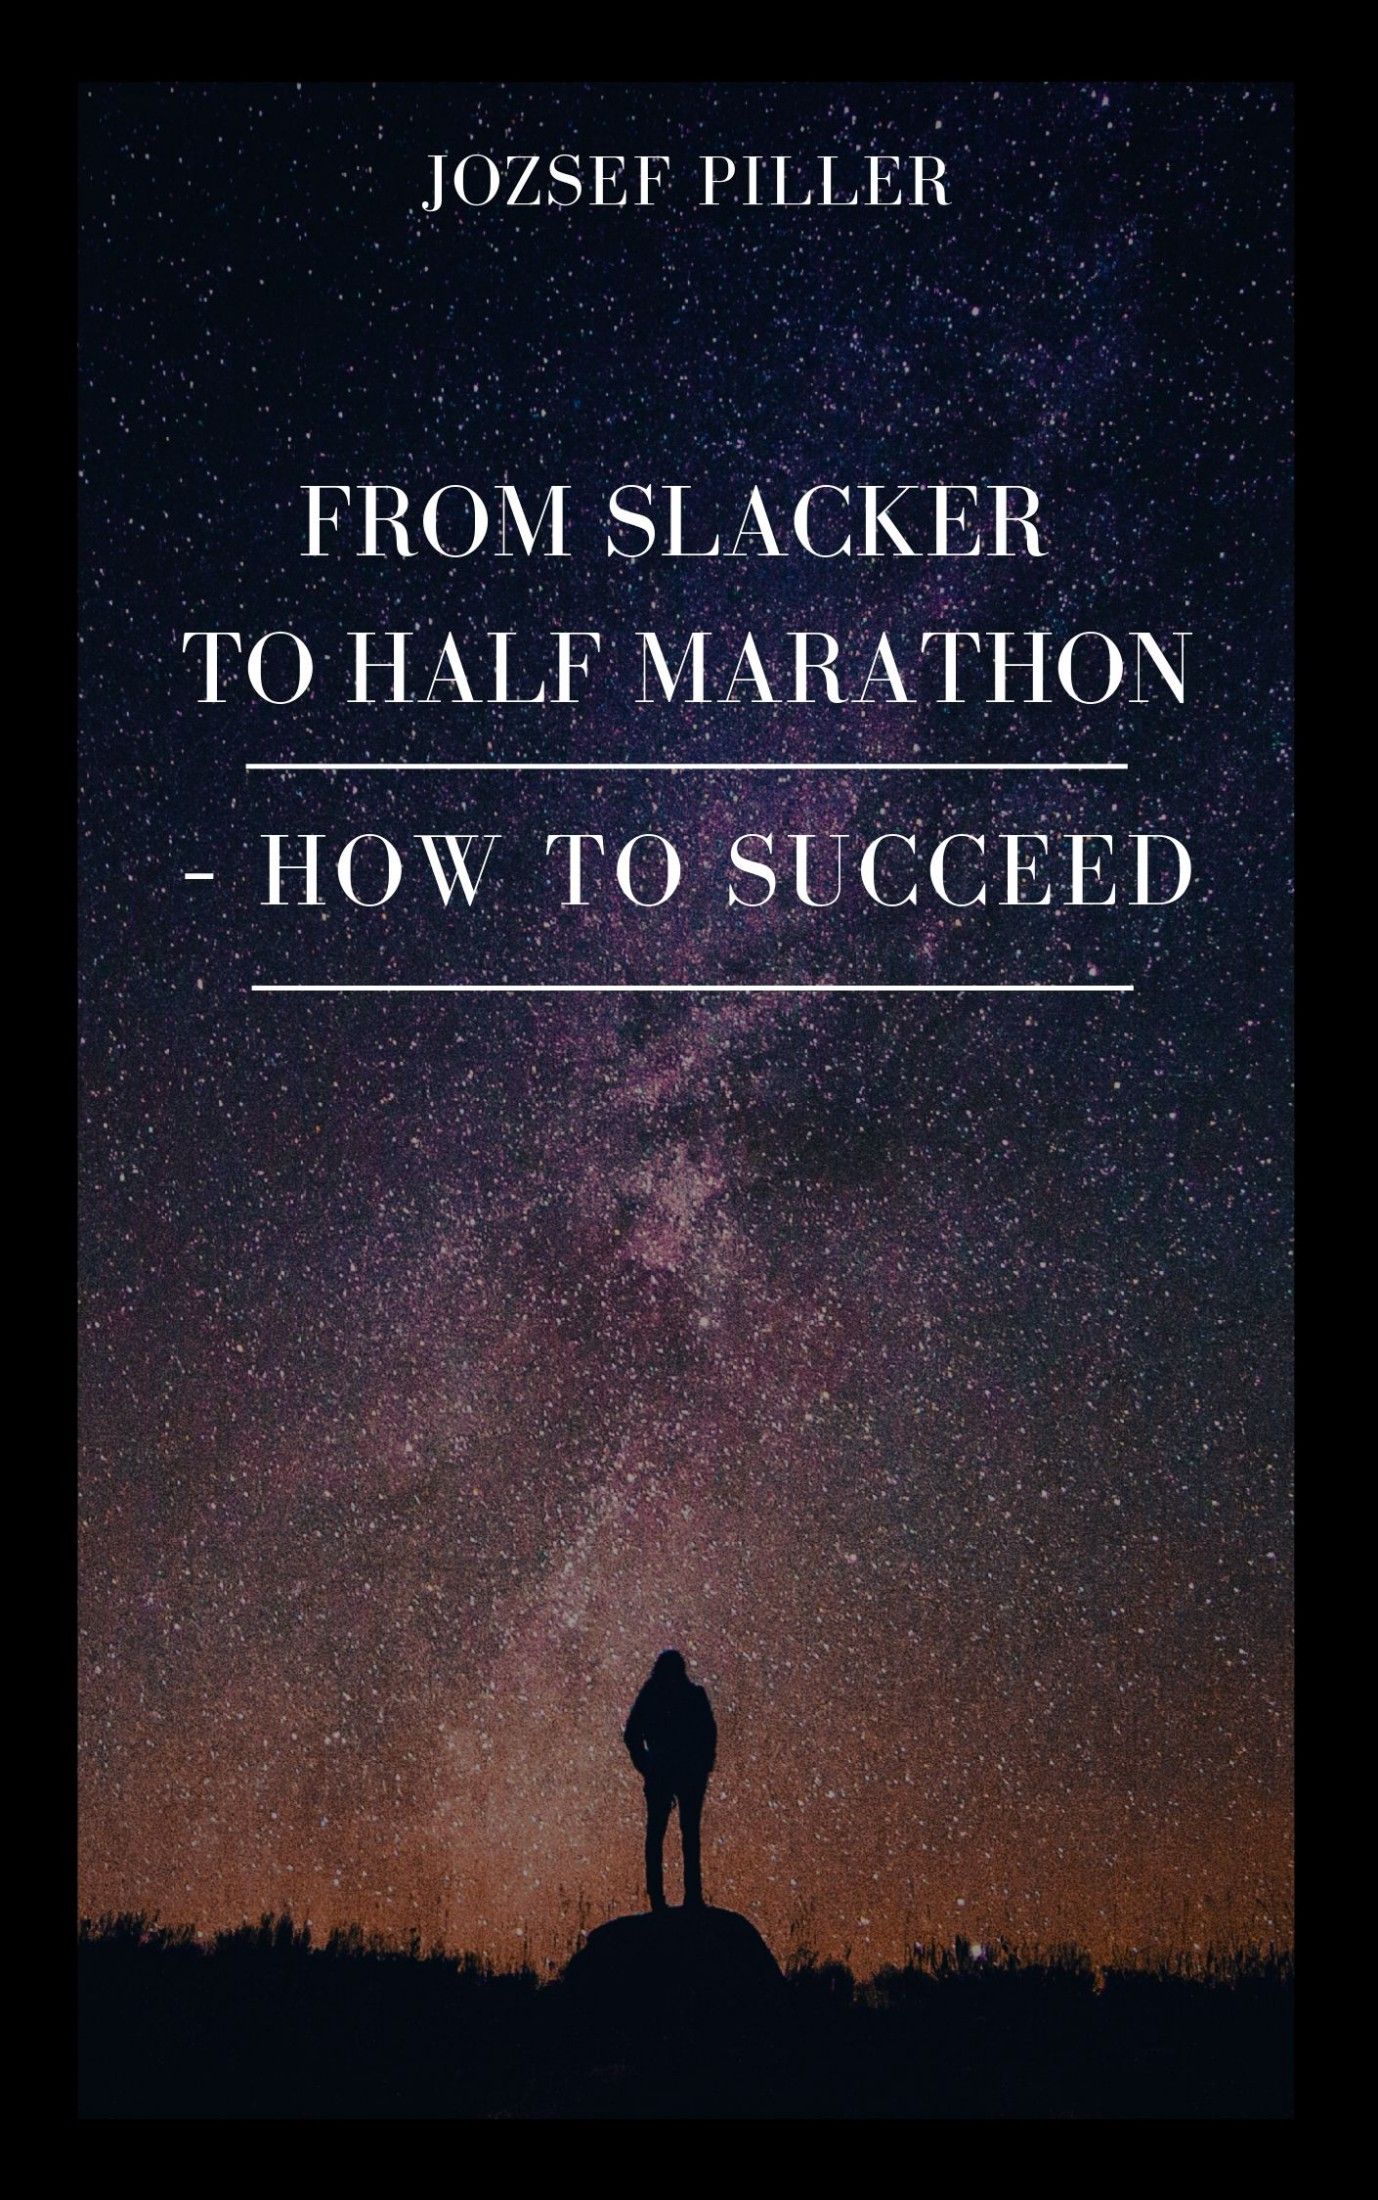 From Slacker to Half Marathon – How to Succeed, eBook by Jozsef Piller